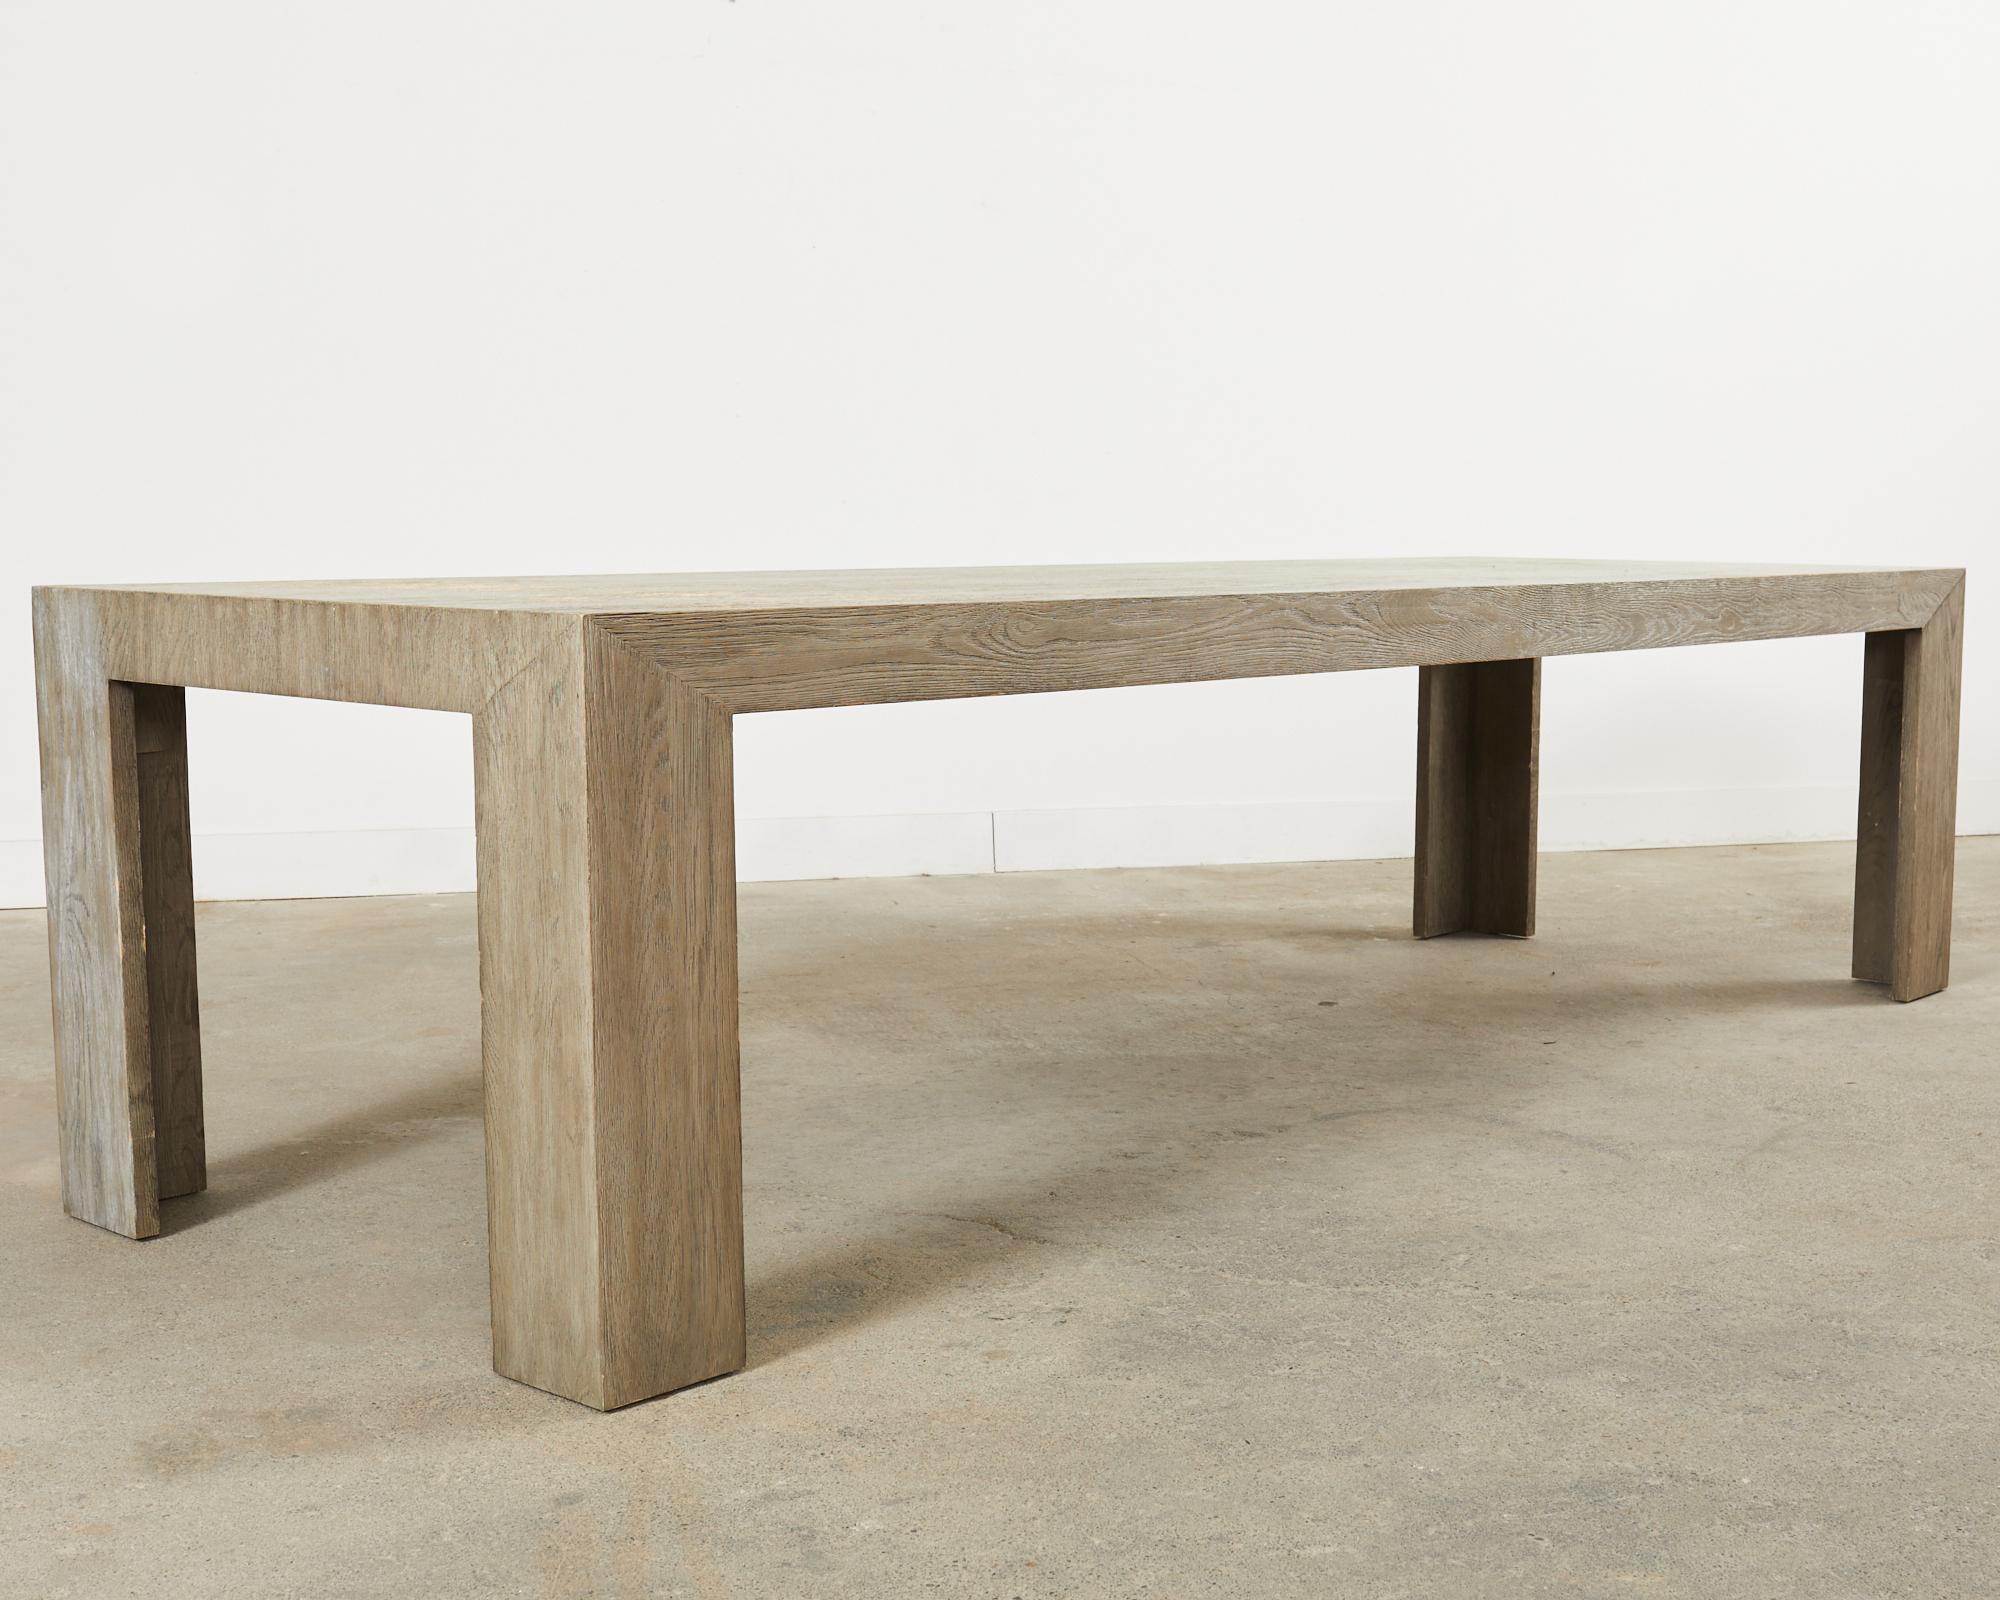 Monumental rectangular dining table measuring 10 feet long featuring an oak veneer with a distressed, cerused stained finish. The table was designed in the parsons style with modern bracket legs. Excellent joinery and craftsmanship that seats up to